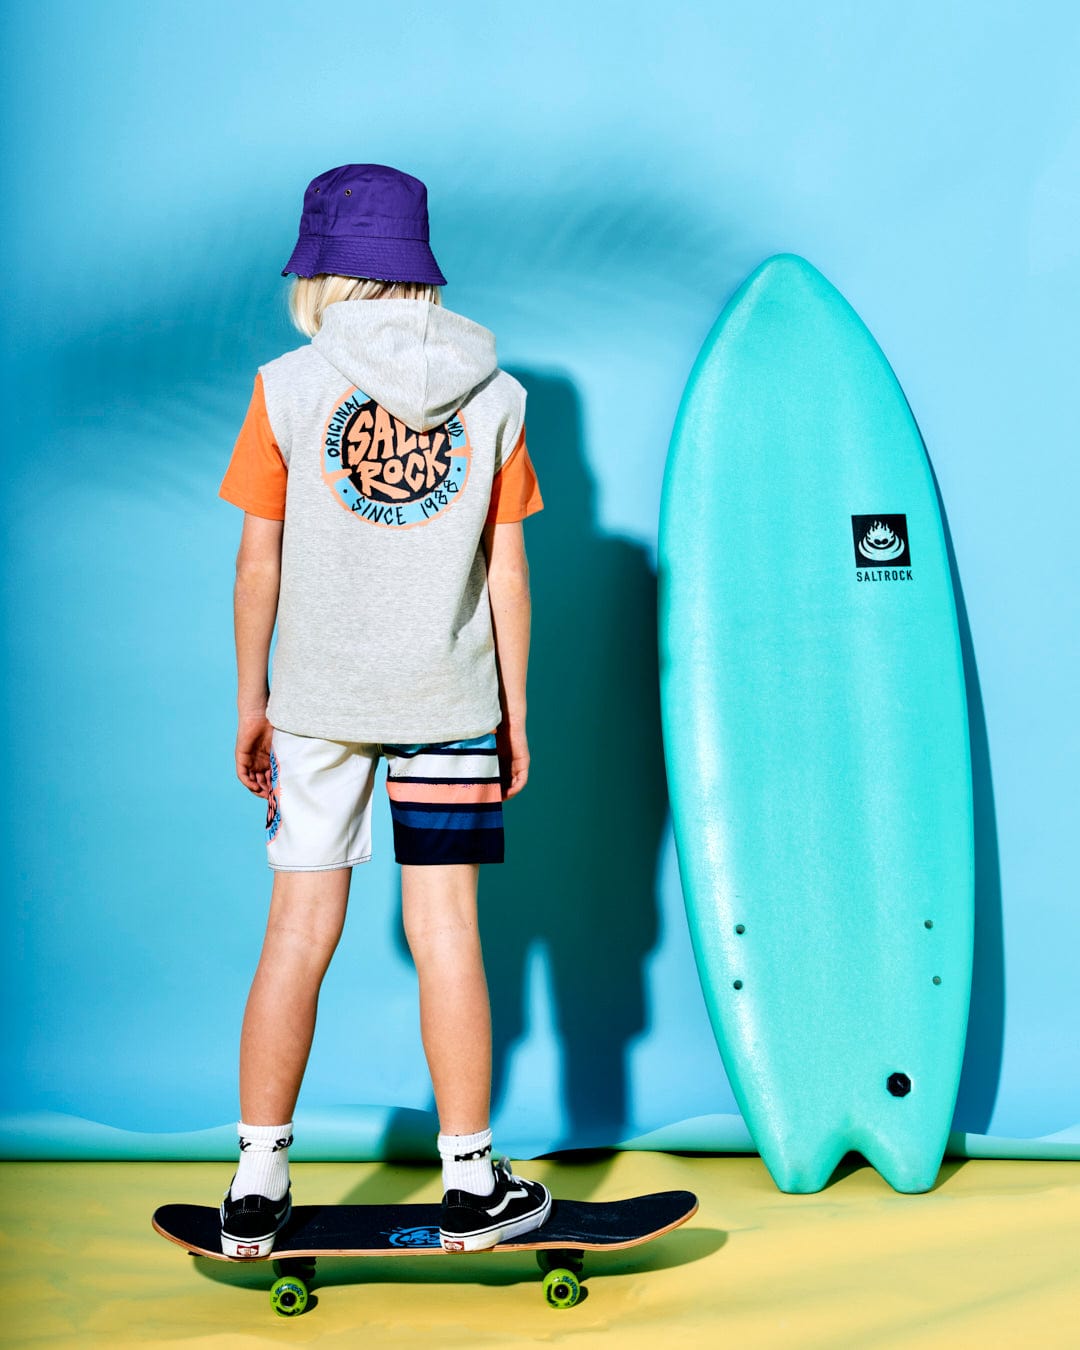 Child with blonde hair wearing a Saltrock SR Original - Kids Sleeveless Pop Hoodie - Grey and shorts stands on a skateboard facing away. A turquoise surfboard is leaned against a blue background, adding a touch of coastal charm reminiscent of Saltrock graphics.